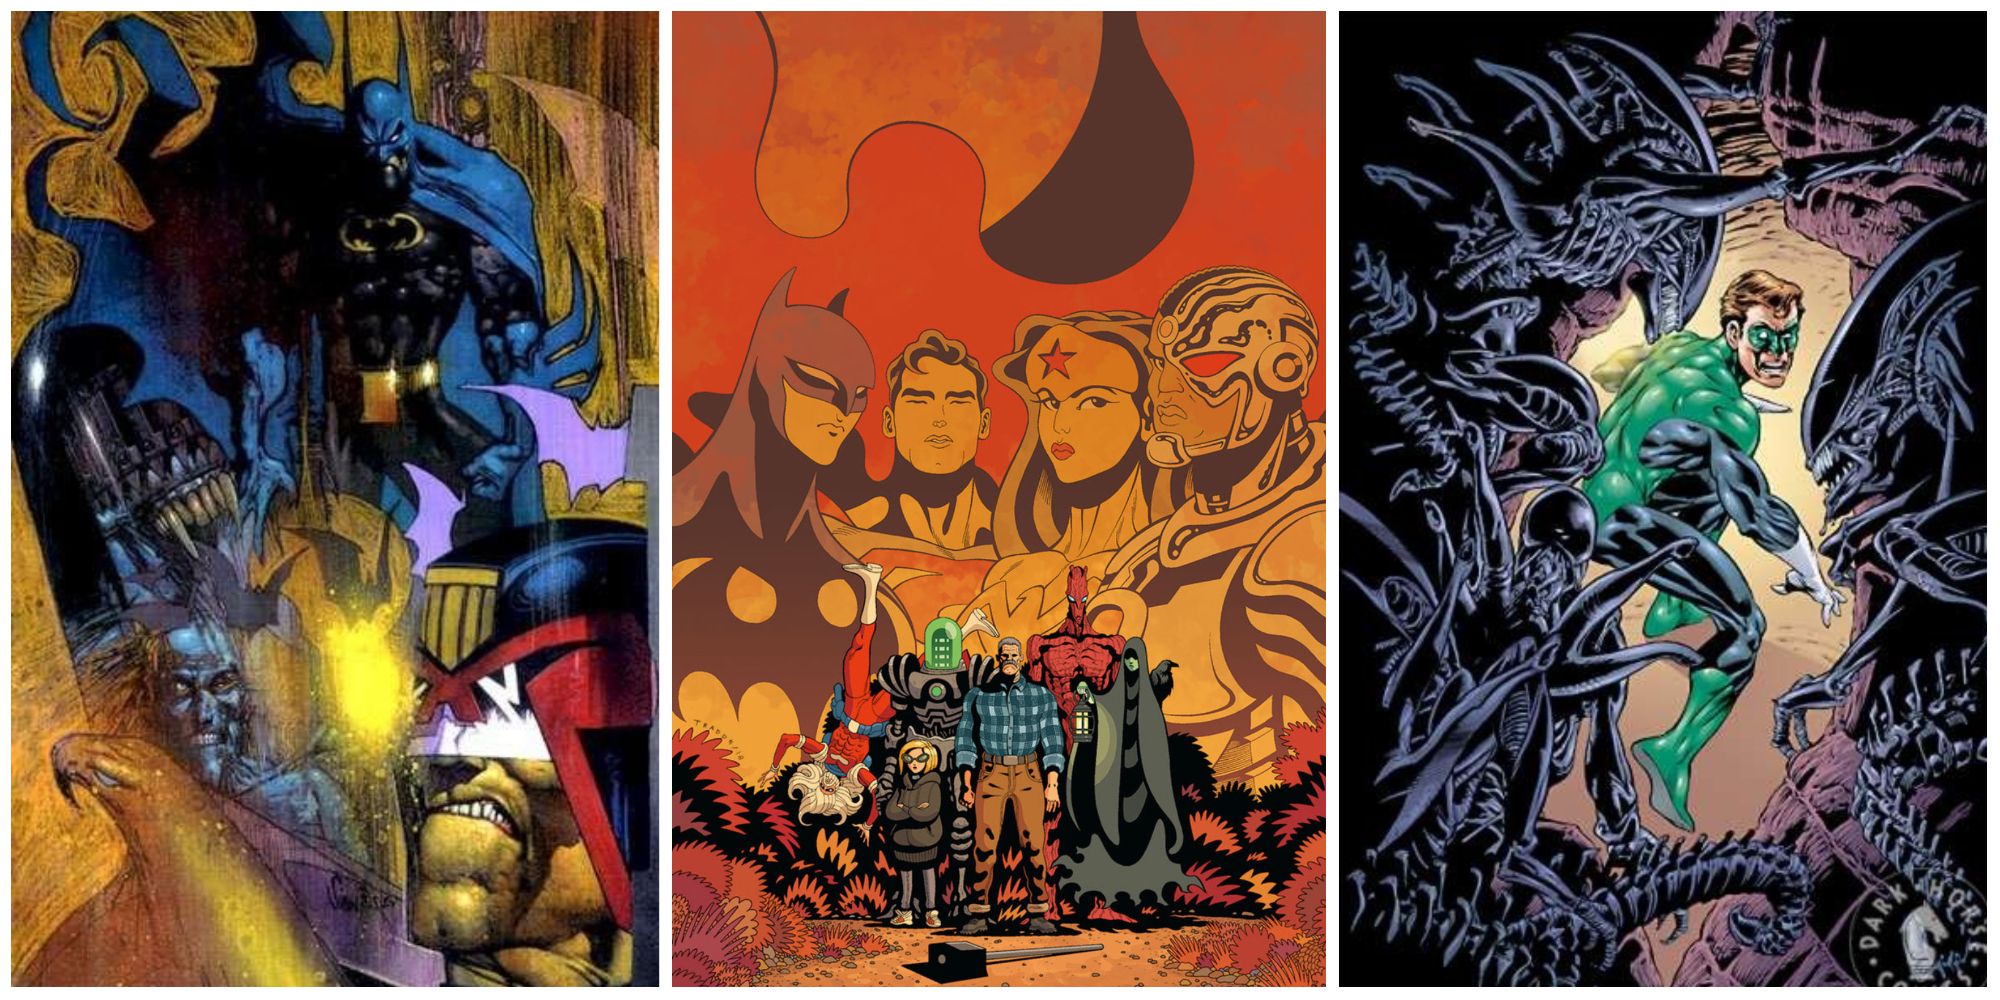 A split image of comic art from DC Comics Crossovers, including Batman with Judge Dredd, the Justice League with Black Hammer, and Aliens with Green Lantern